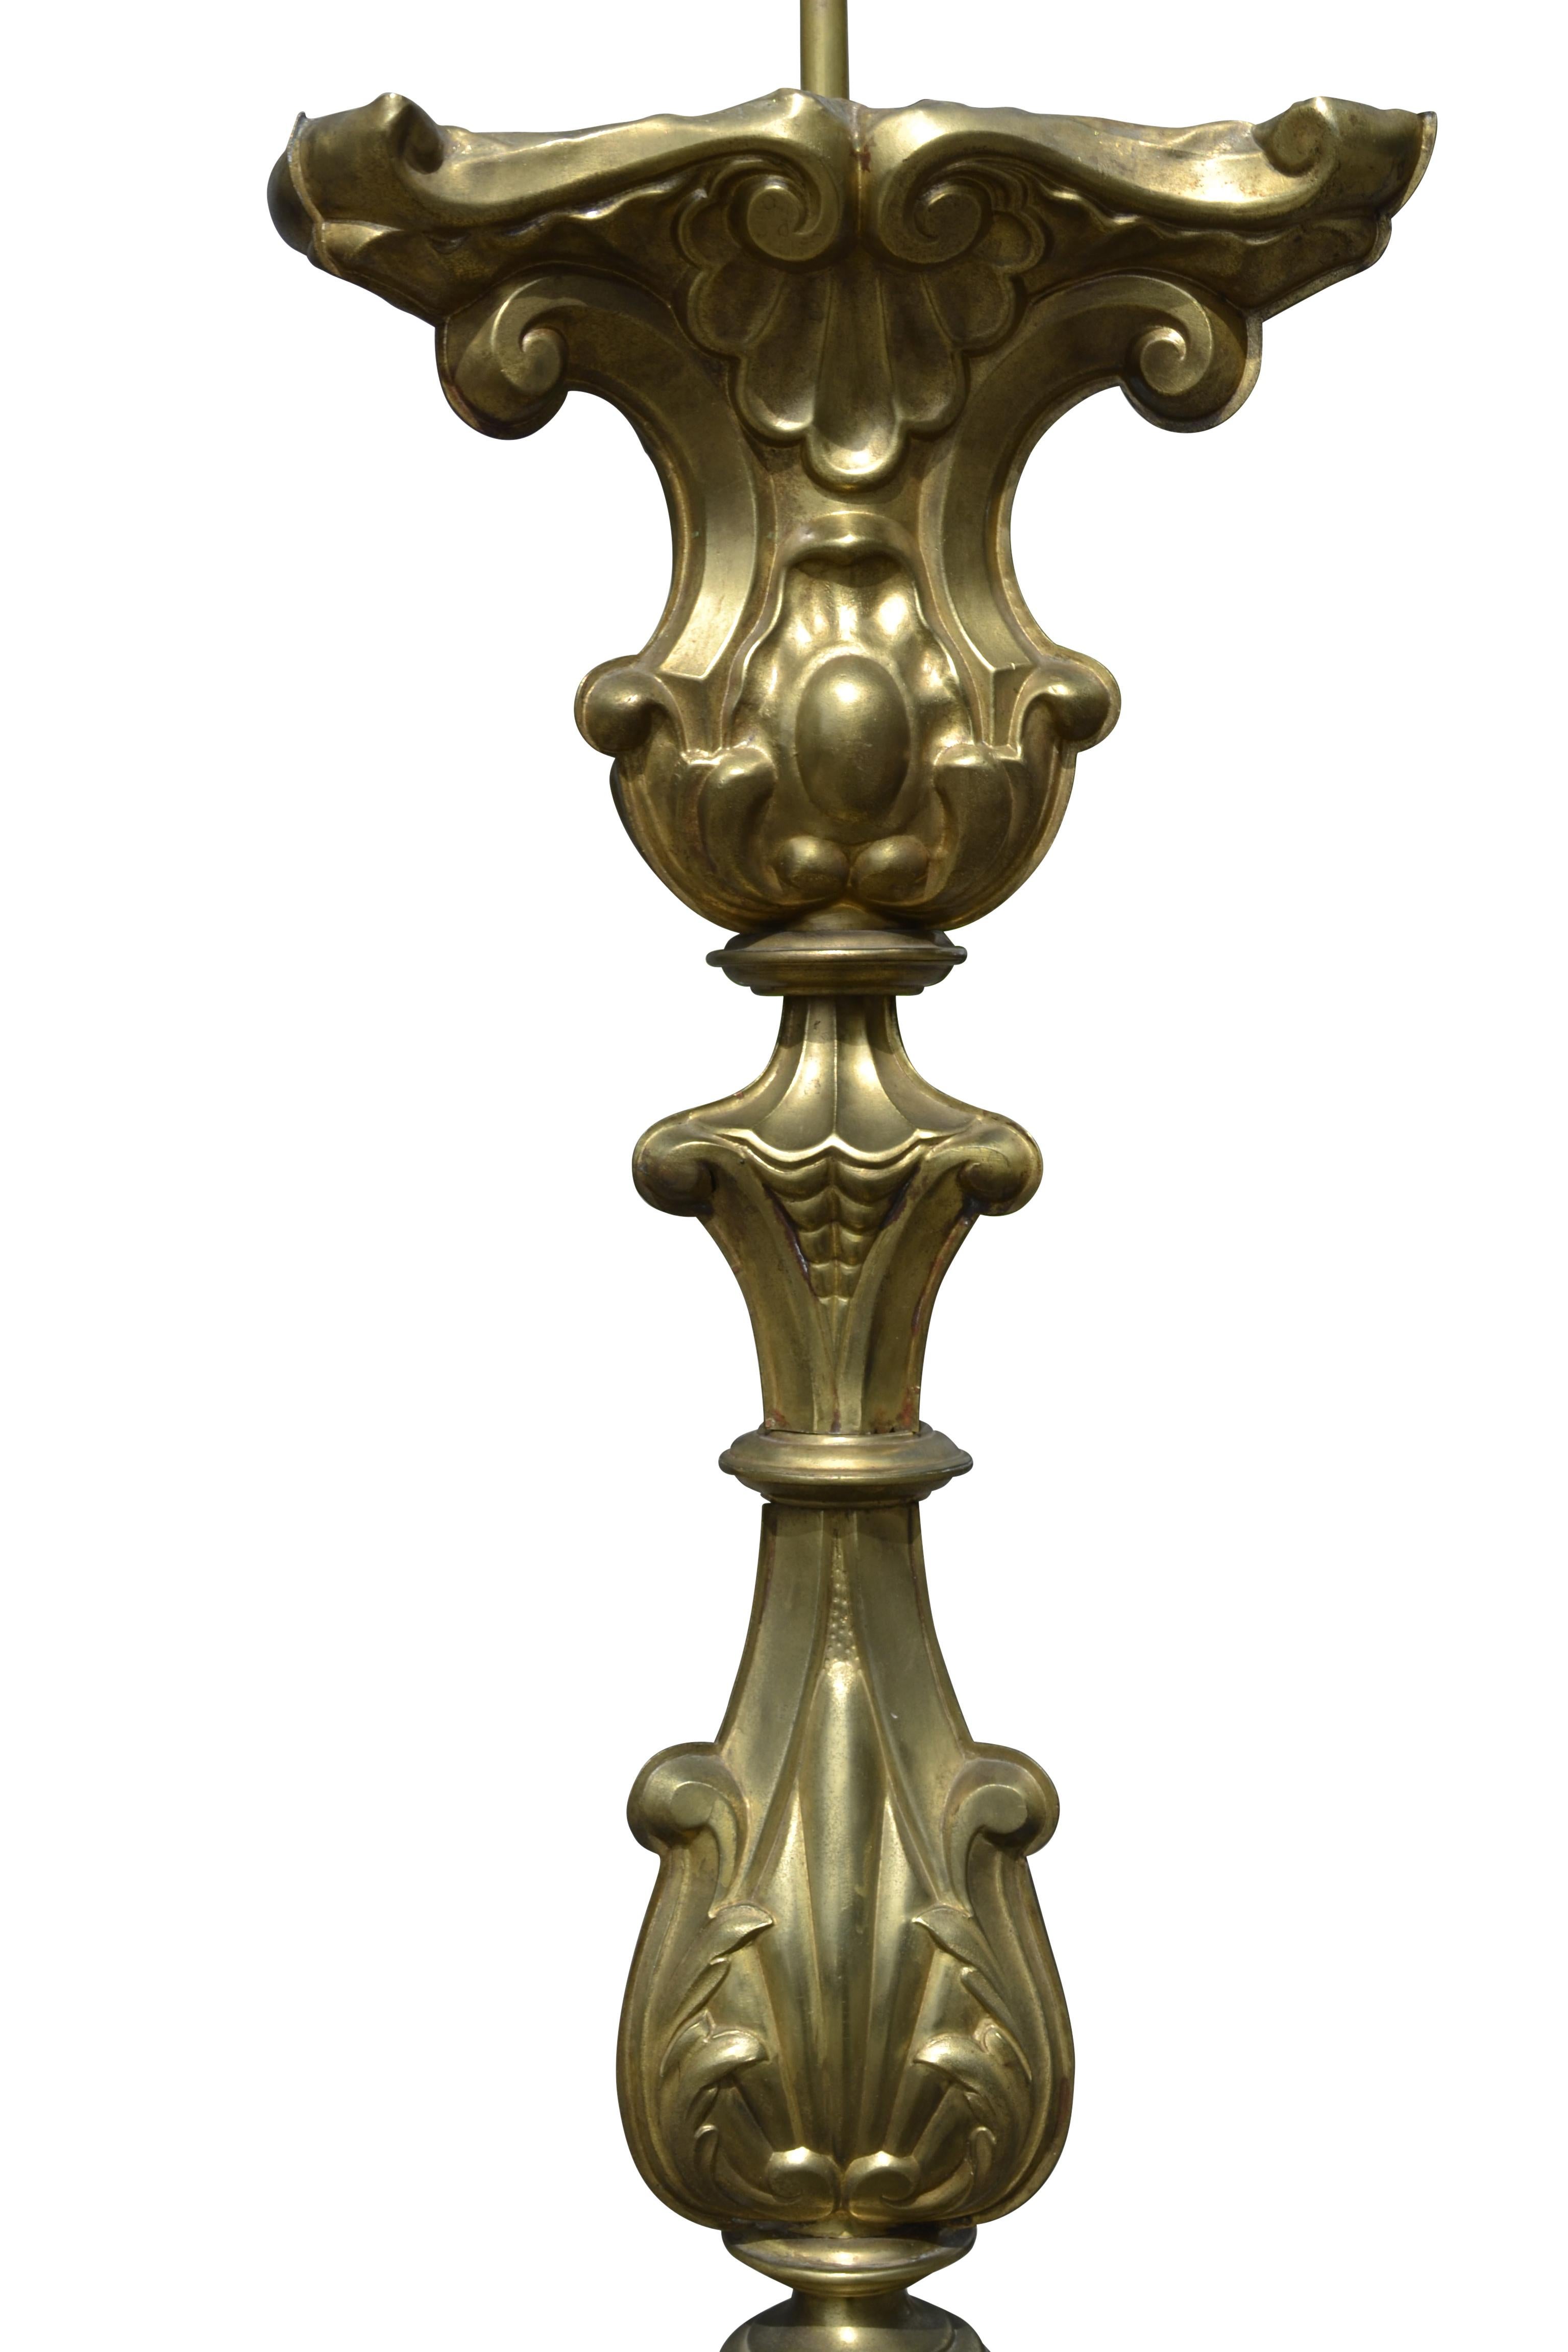 19th Century Silvered Metal Ecclesiastical Candlestick Floor Lamp For Sale